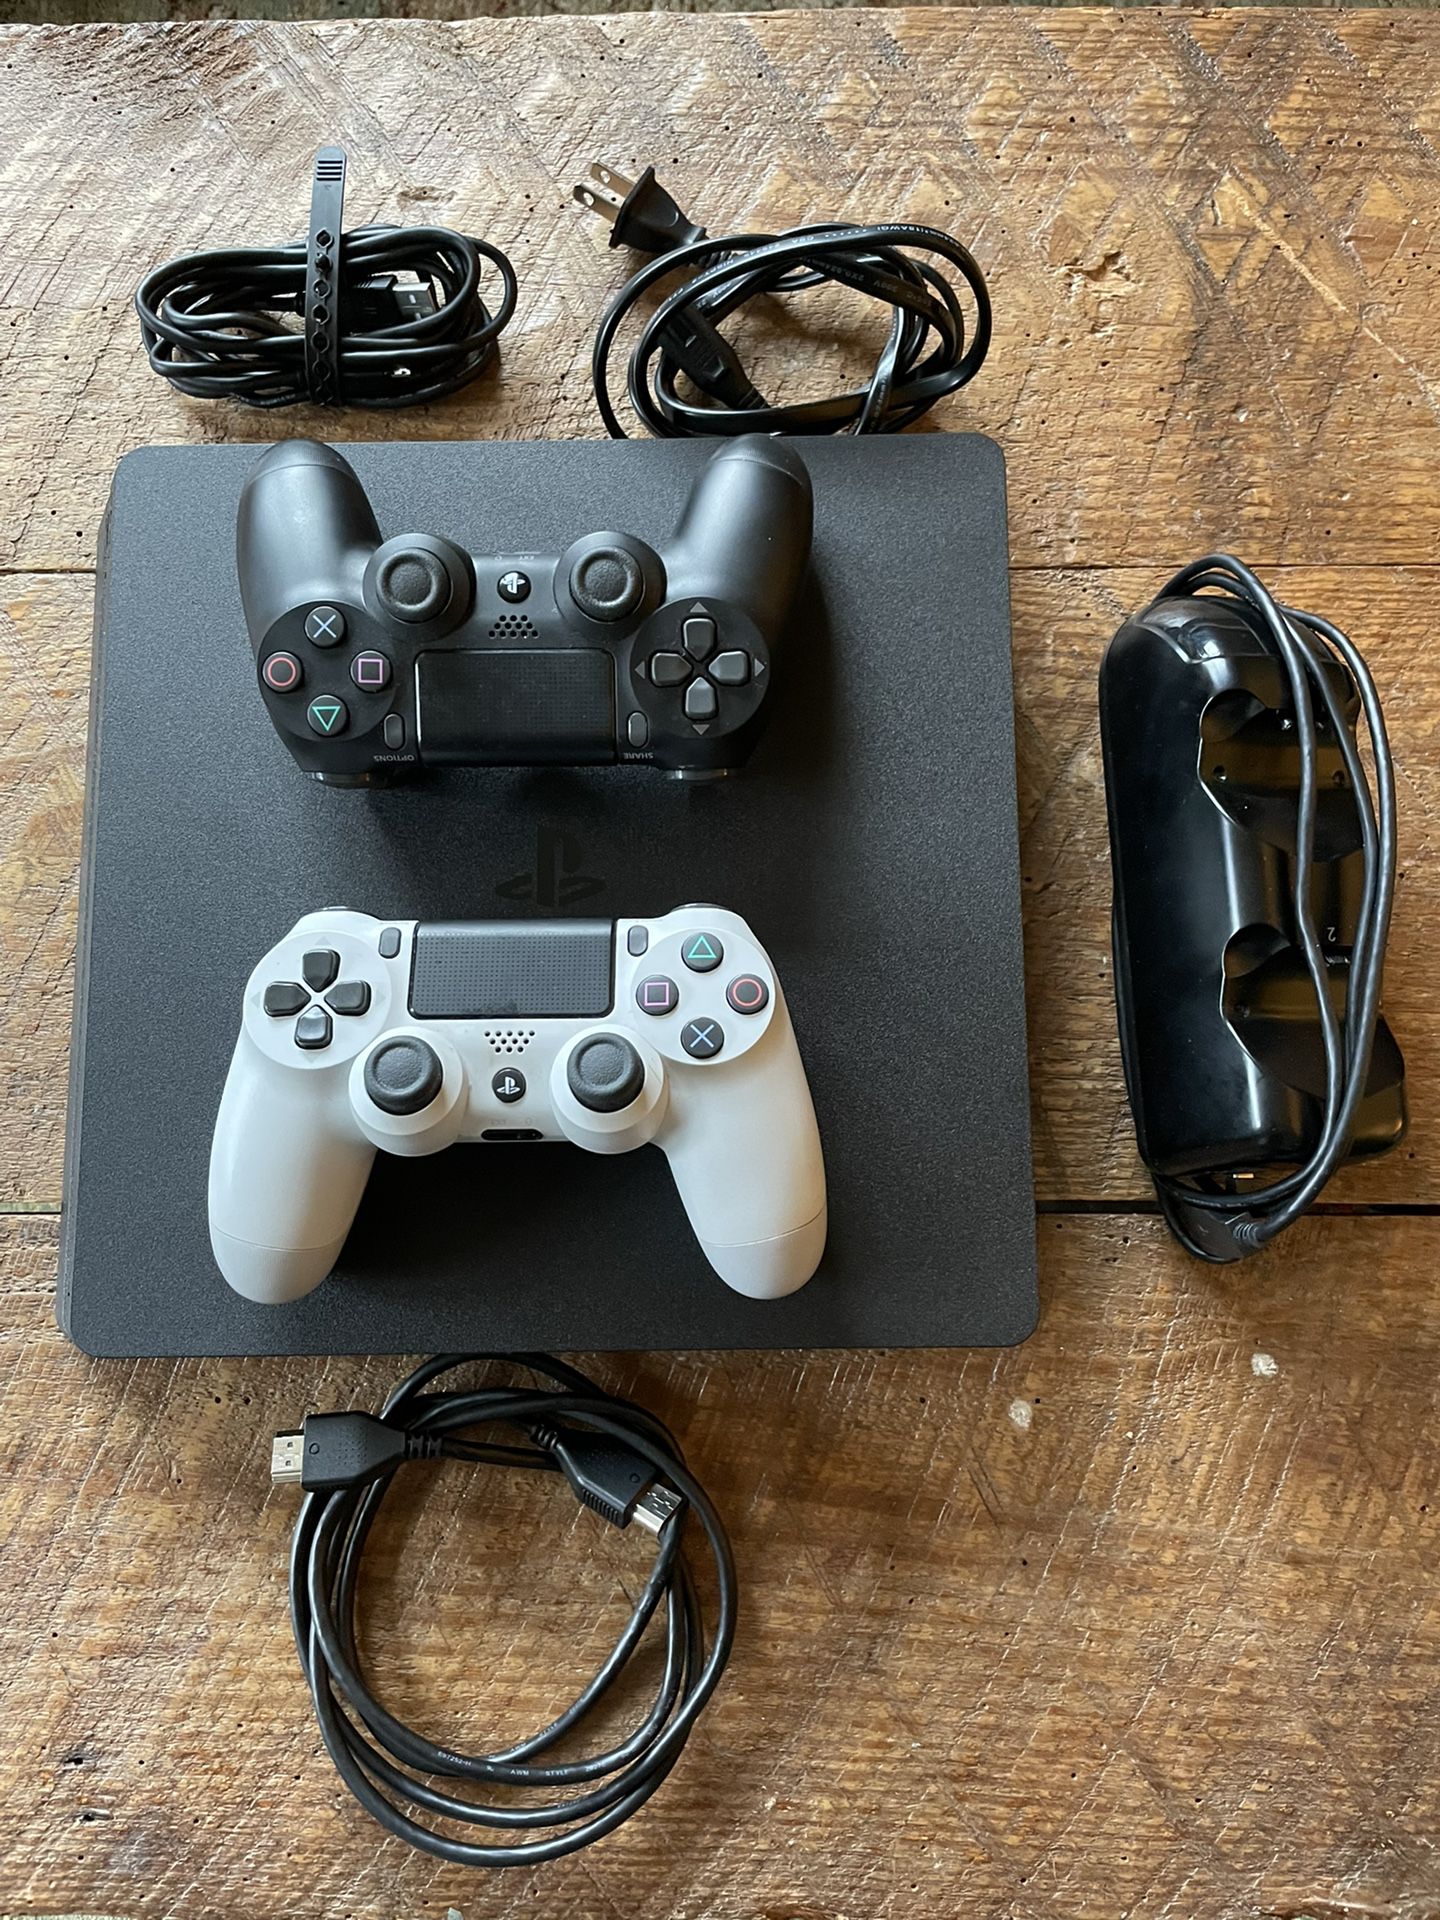 SALE] Sony PS4 Pro 1TB + 2x controllers and charger + 4 games